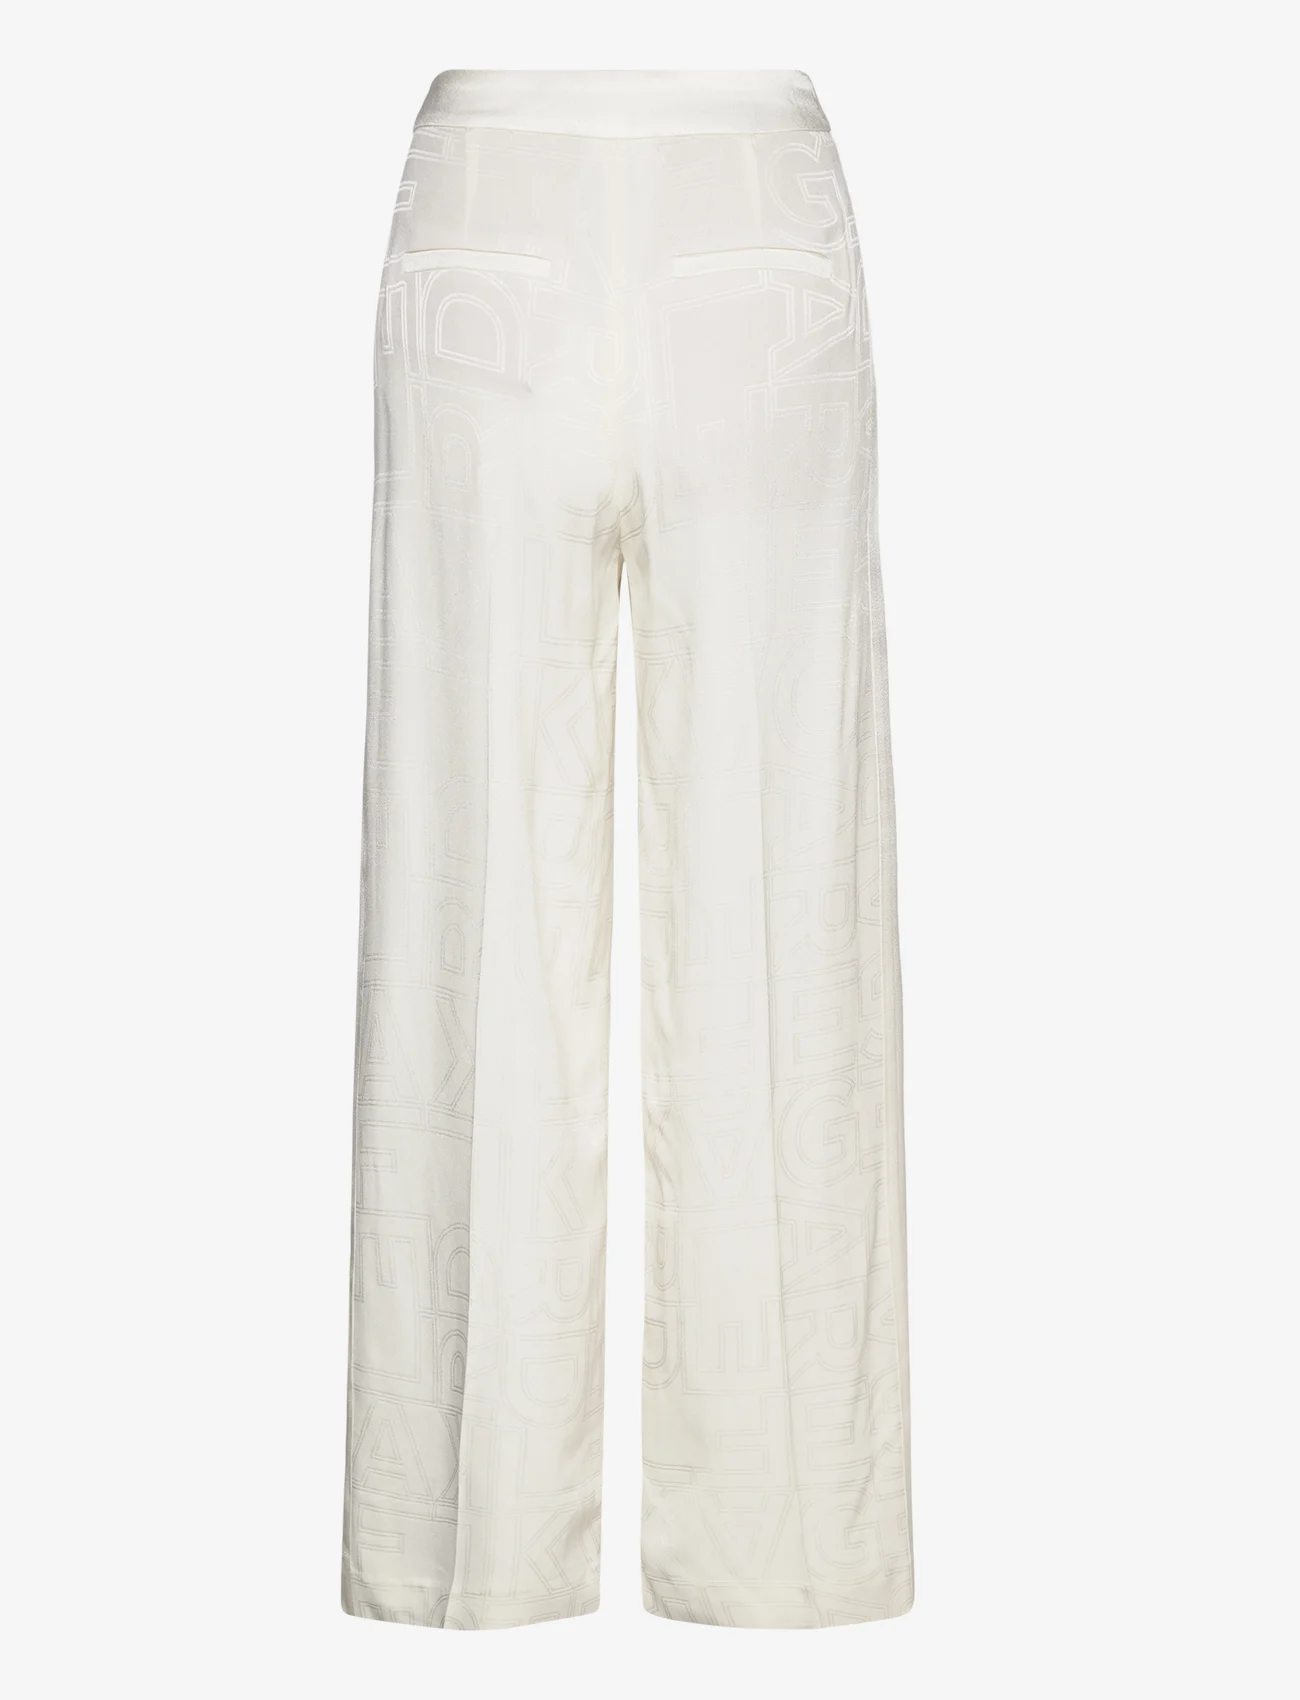 Karl Lagerfeld - logo tailored pants - party wear at outlet prices - off white - 1